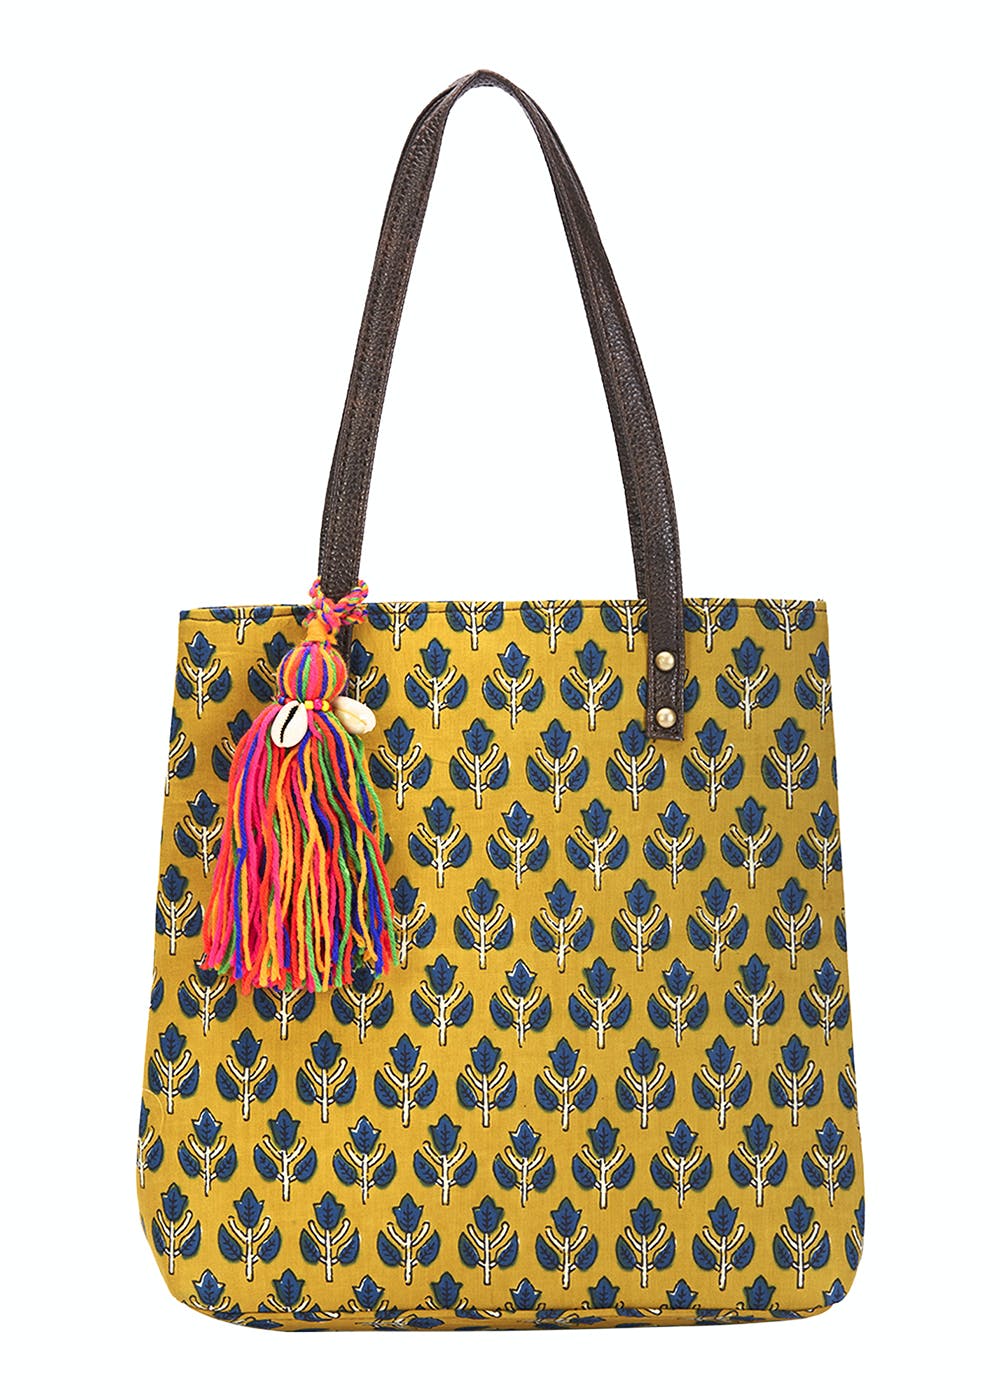 Shop ECO TOTE for Women  Buy Hello Summer Tote bag by Forever21  0